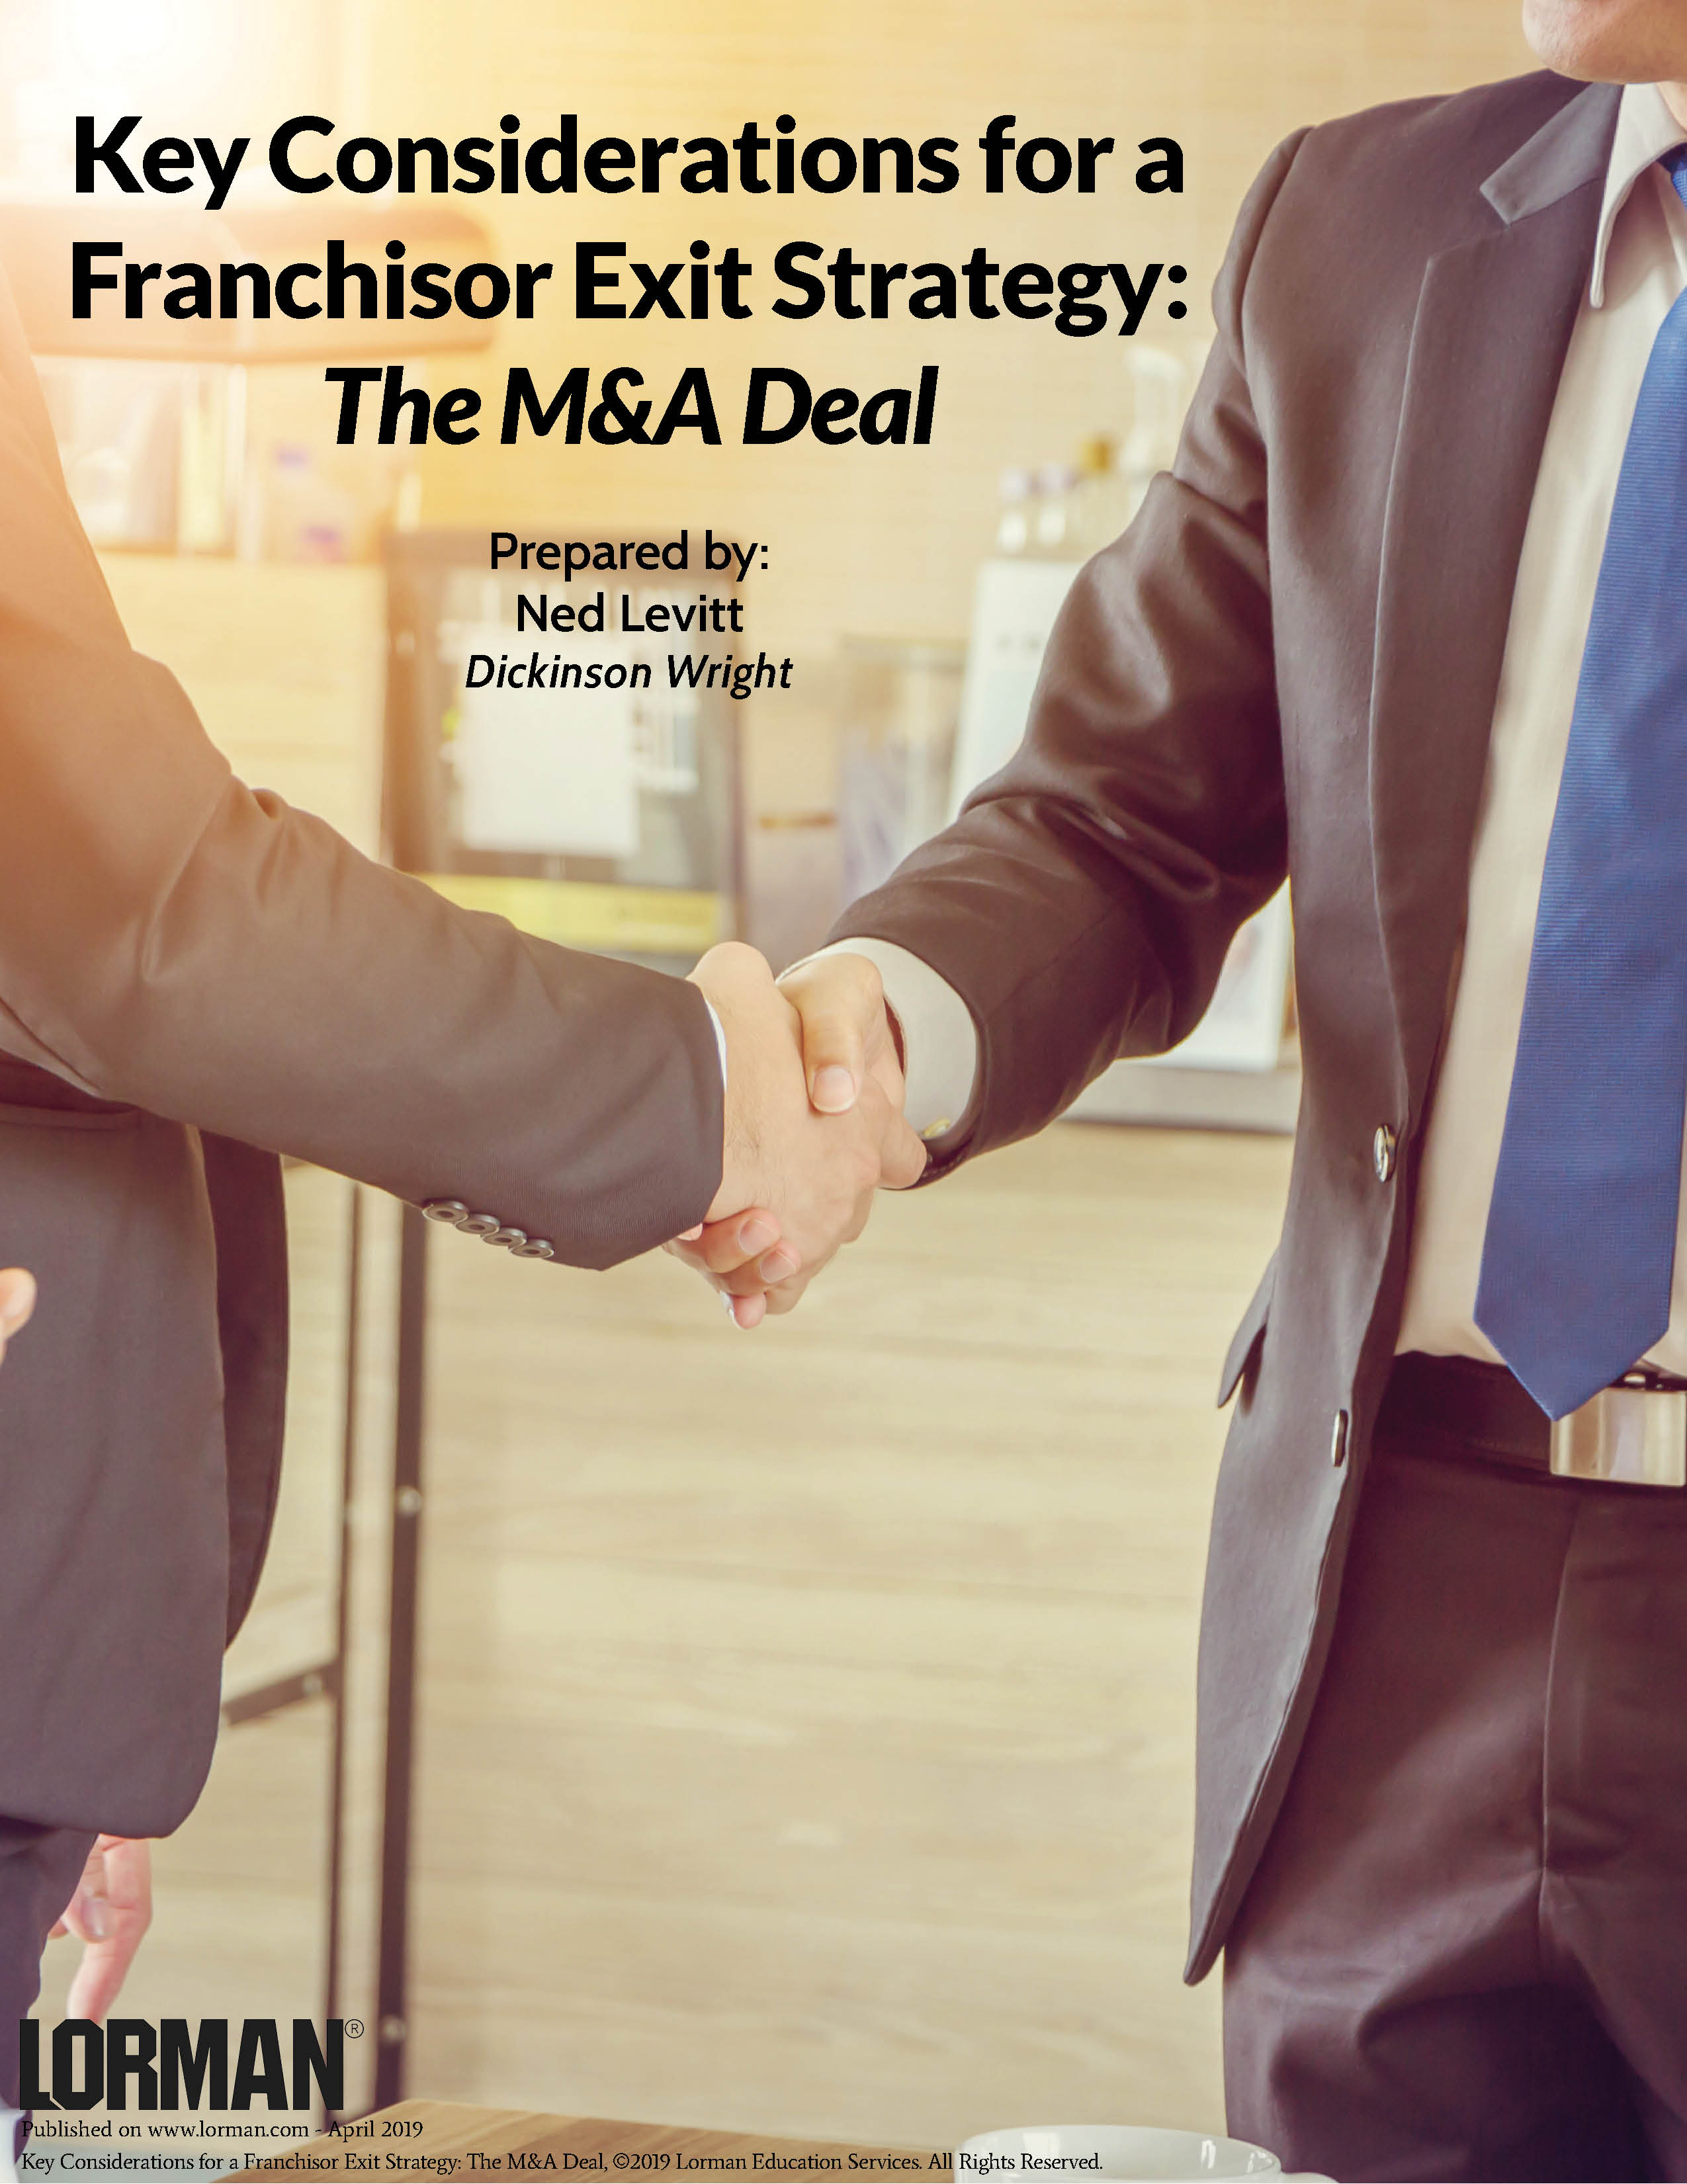 Key Considerations for a Franchisor Exit Strategy: The M&A Deal